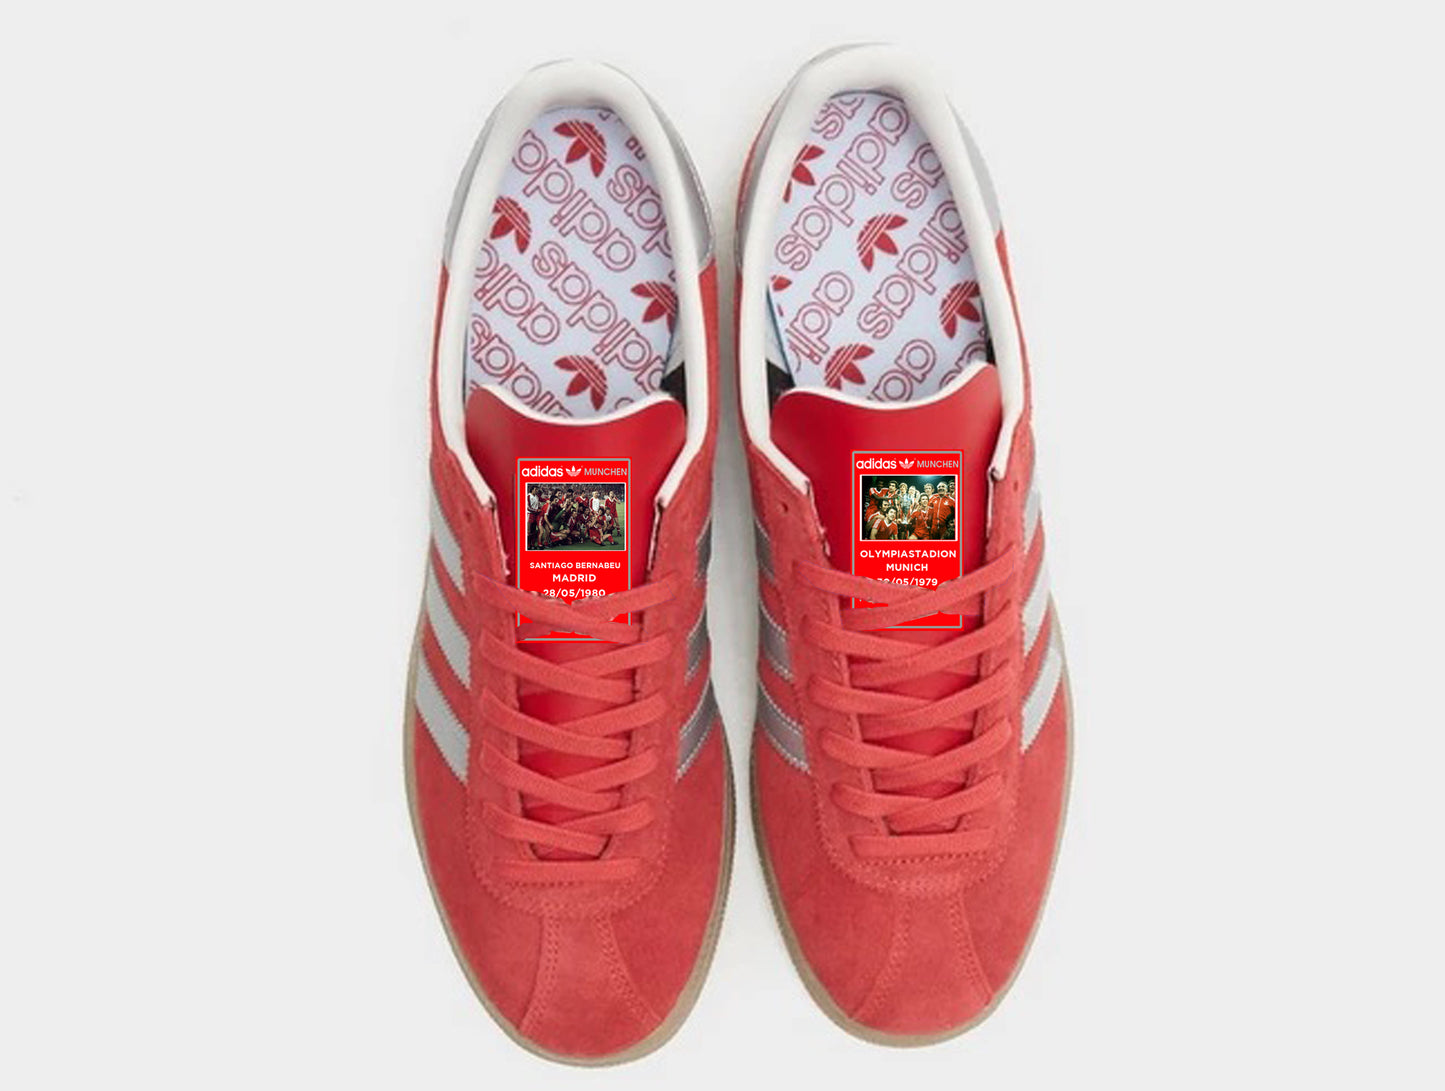 Limited edition Nottingham Forest European cup winners 79 and 80 Custom Adidas Munchen red custom trainers / sneakers